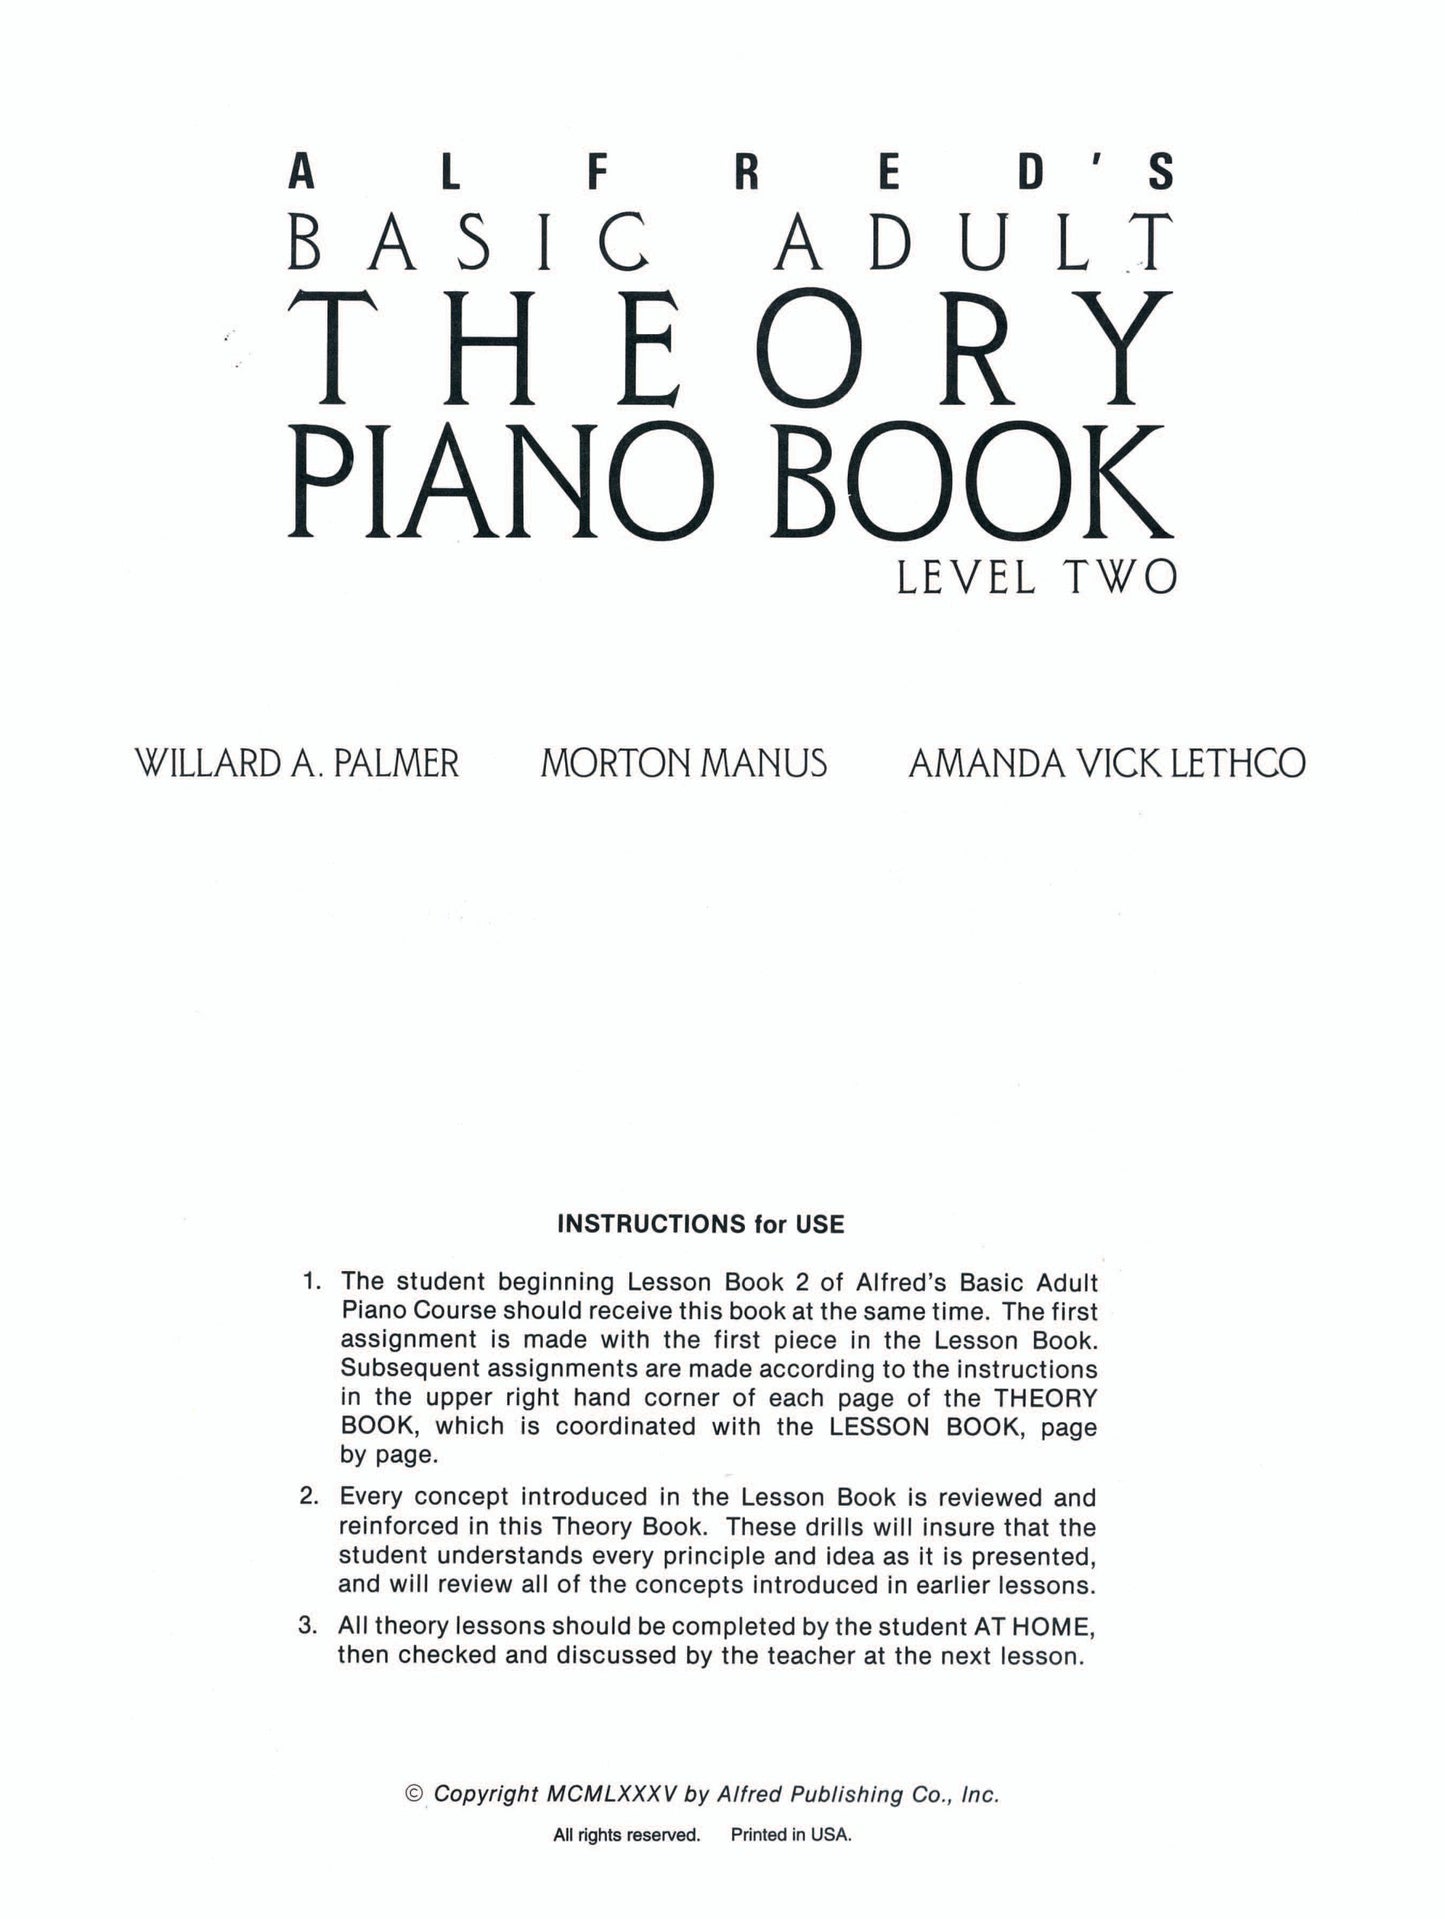 Alfred's Basic Adult Piano Course - Theory Book 2